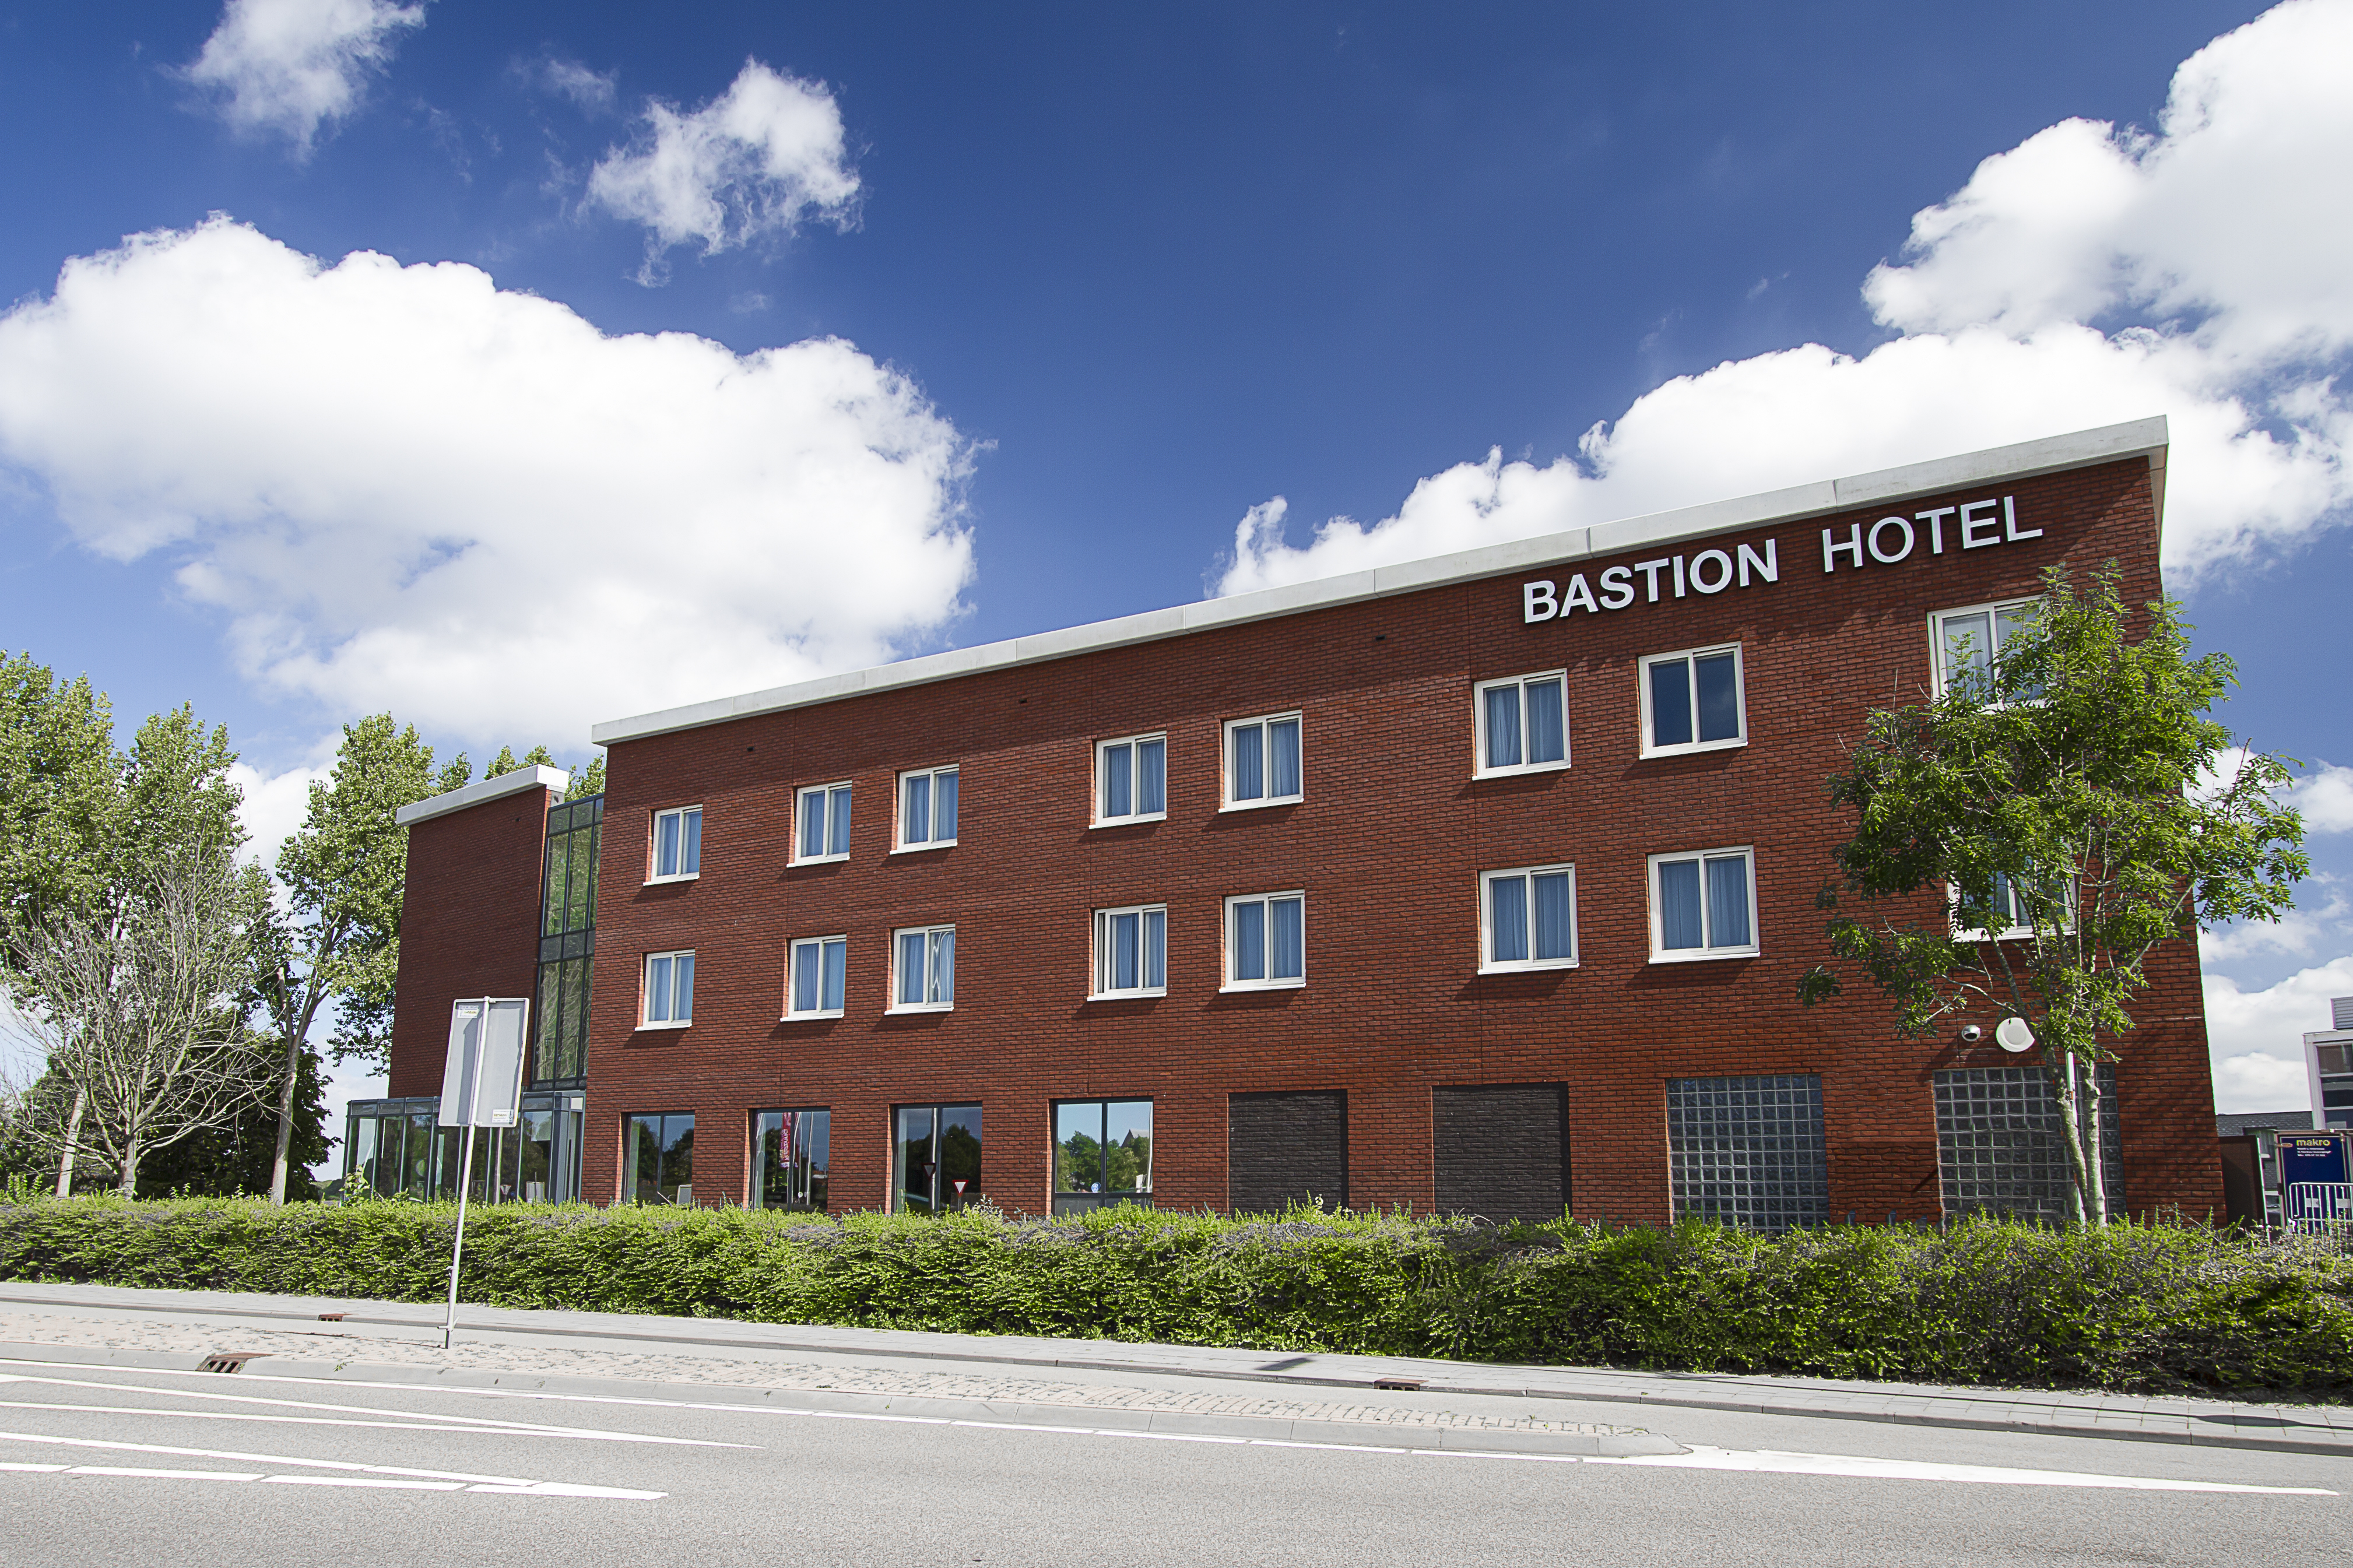 Bastion Hotel Brielle Europoort <br/>64.00 ew <br/> <a href='http://vakantieoplossing.nl/outpage/?id=c68afd6d3bc1907dc65ea924f1433cb4' target='_blank'>View Details</a>